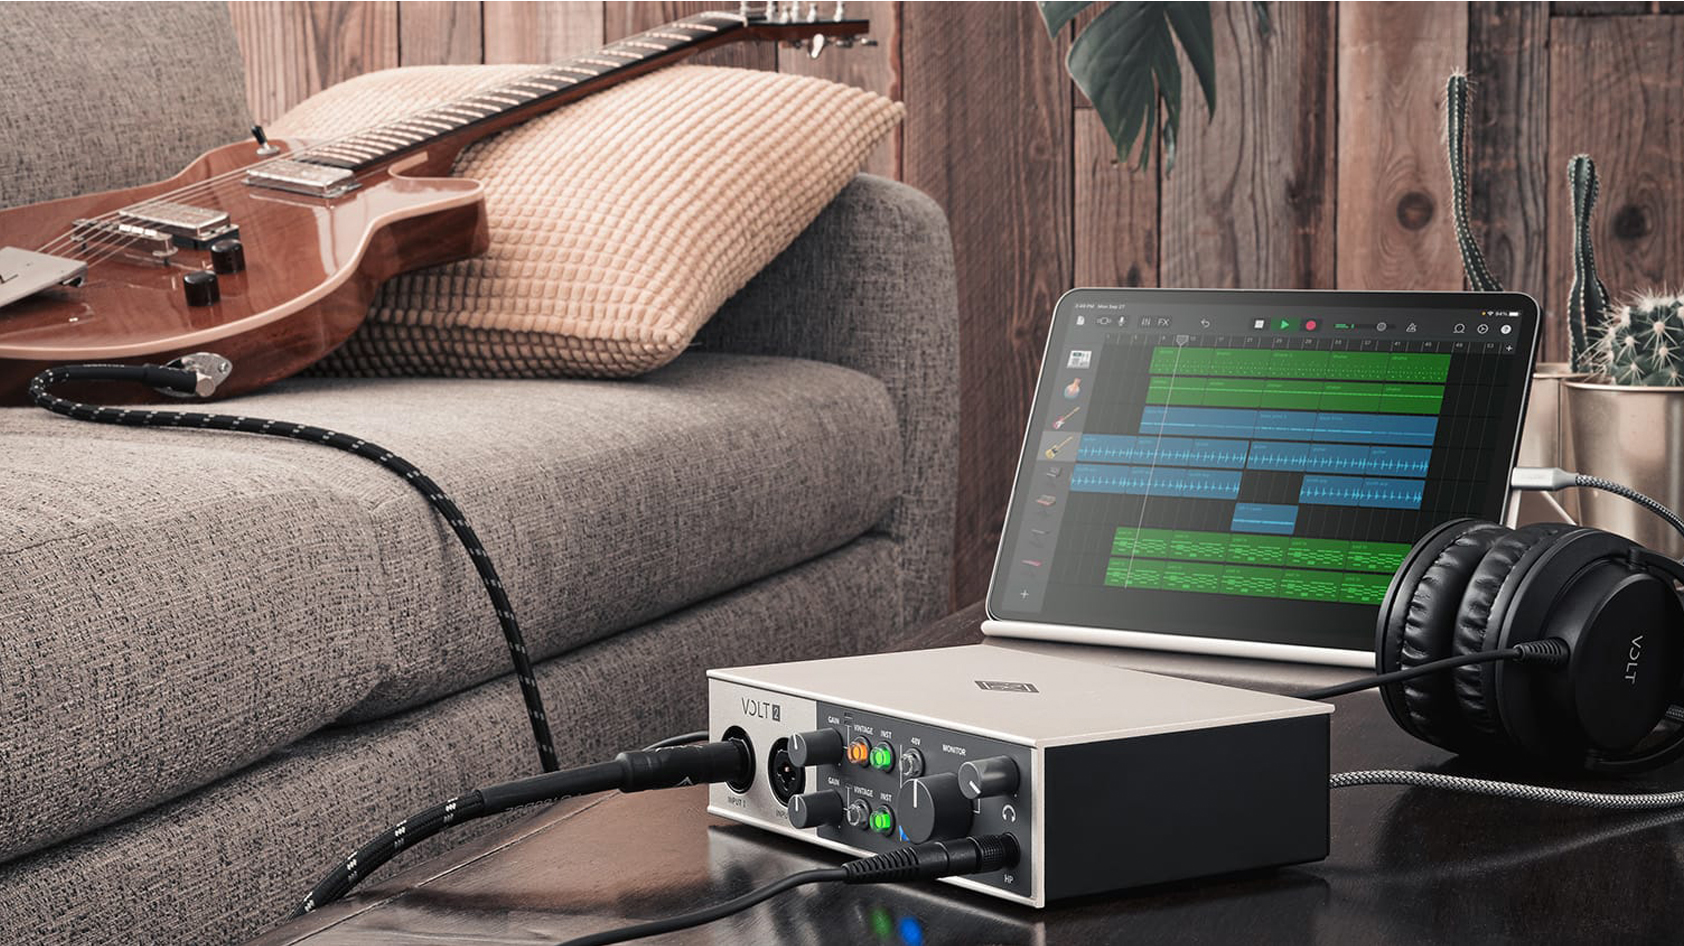 Promotional image of Universal Audio Volt 2 shown on a table plugged into an iPad with a guitar on a couch.